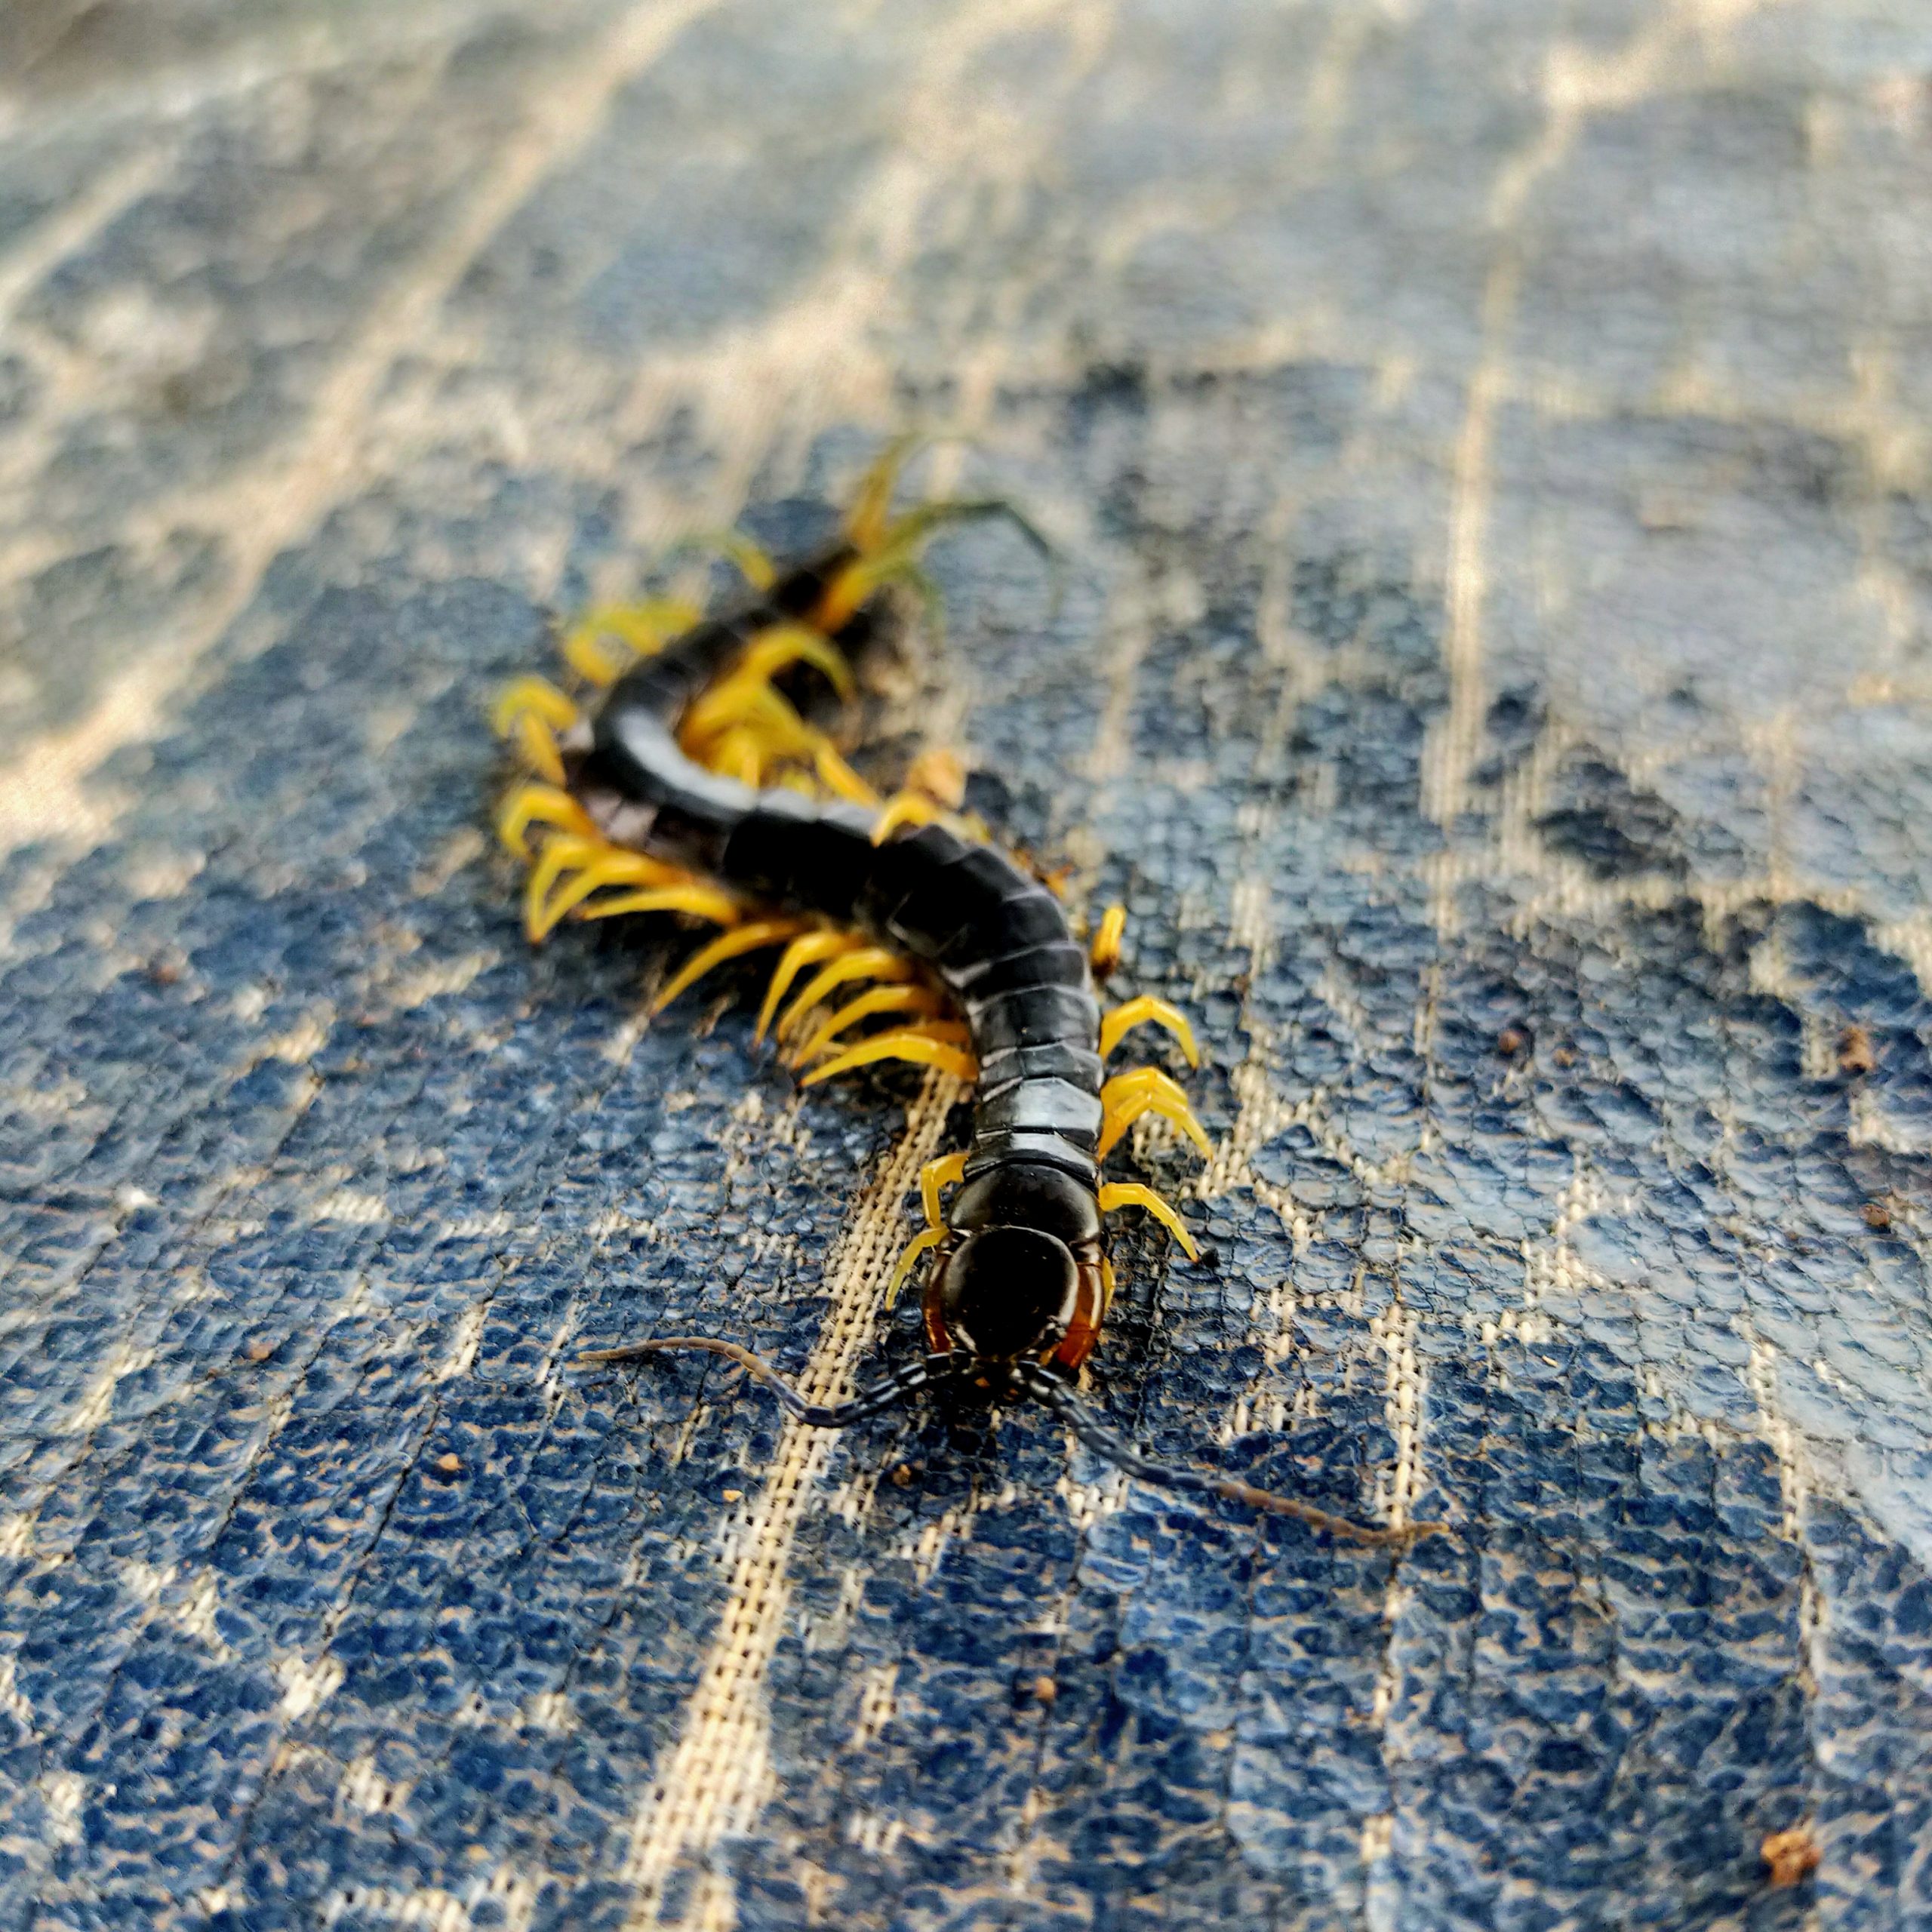 A centipede on the ground